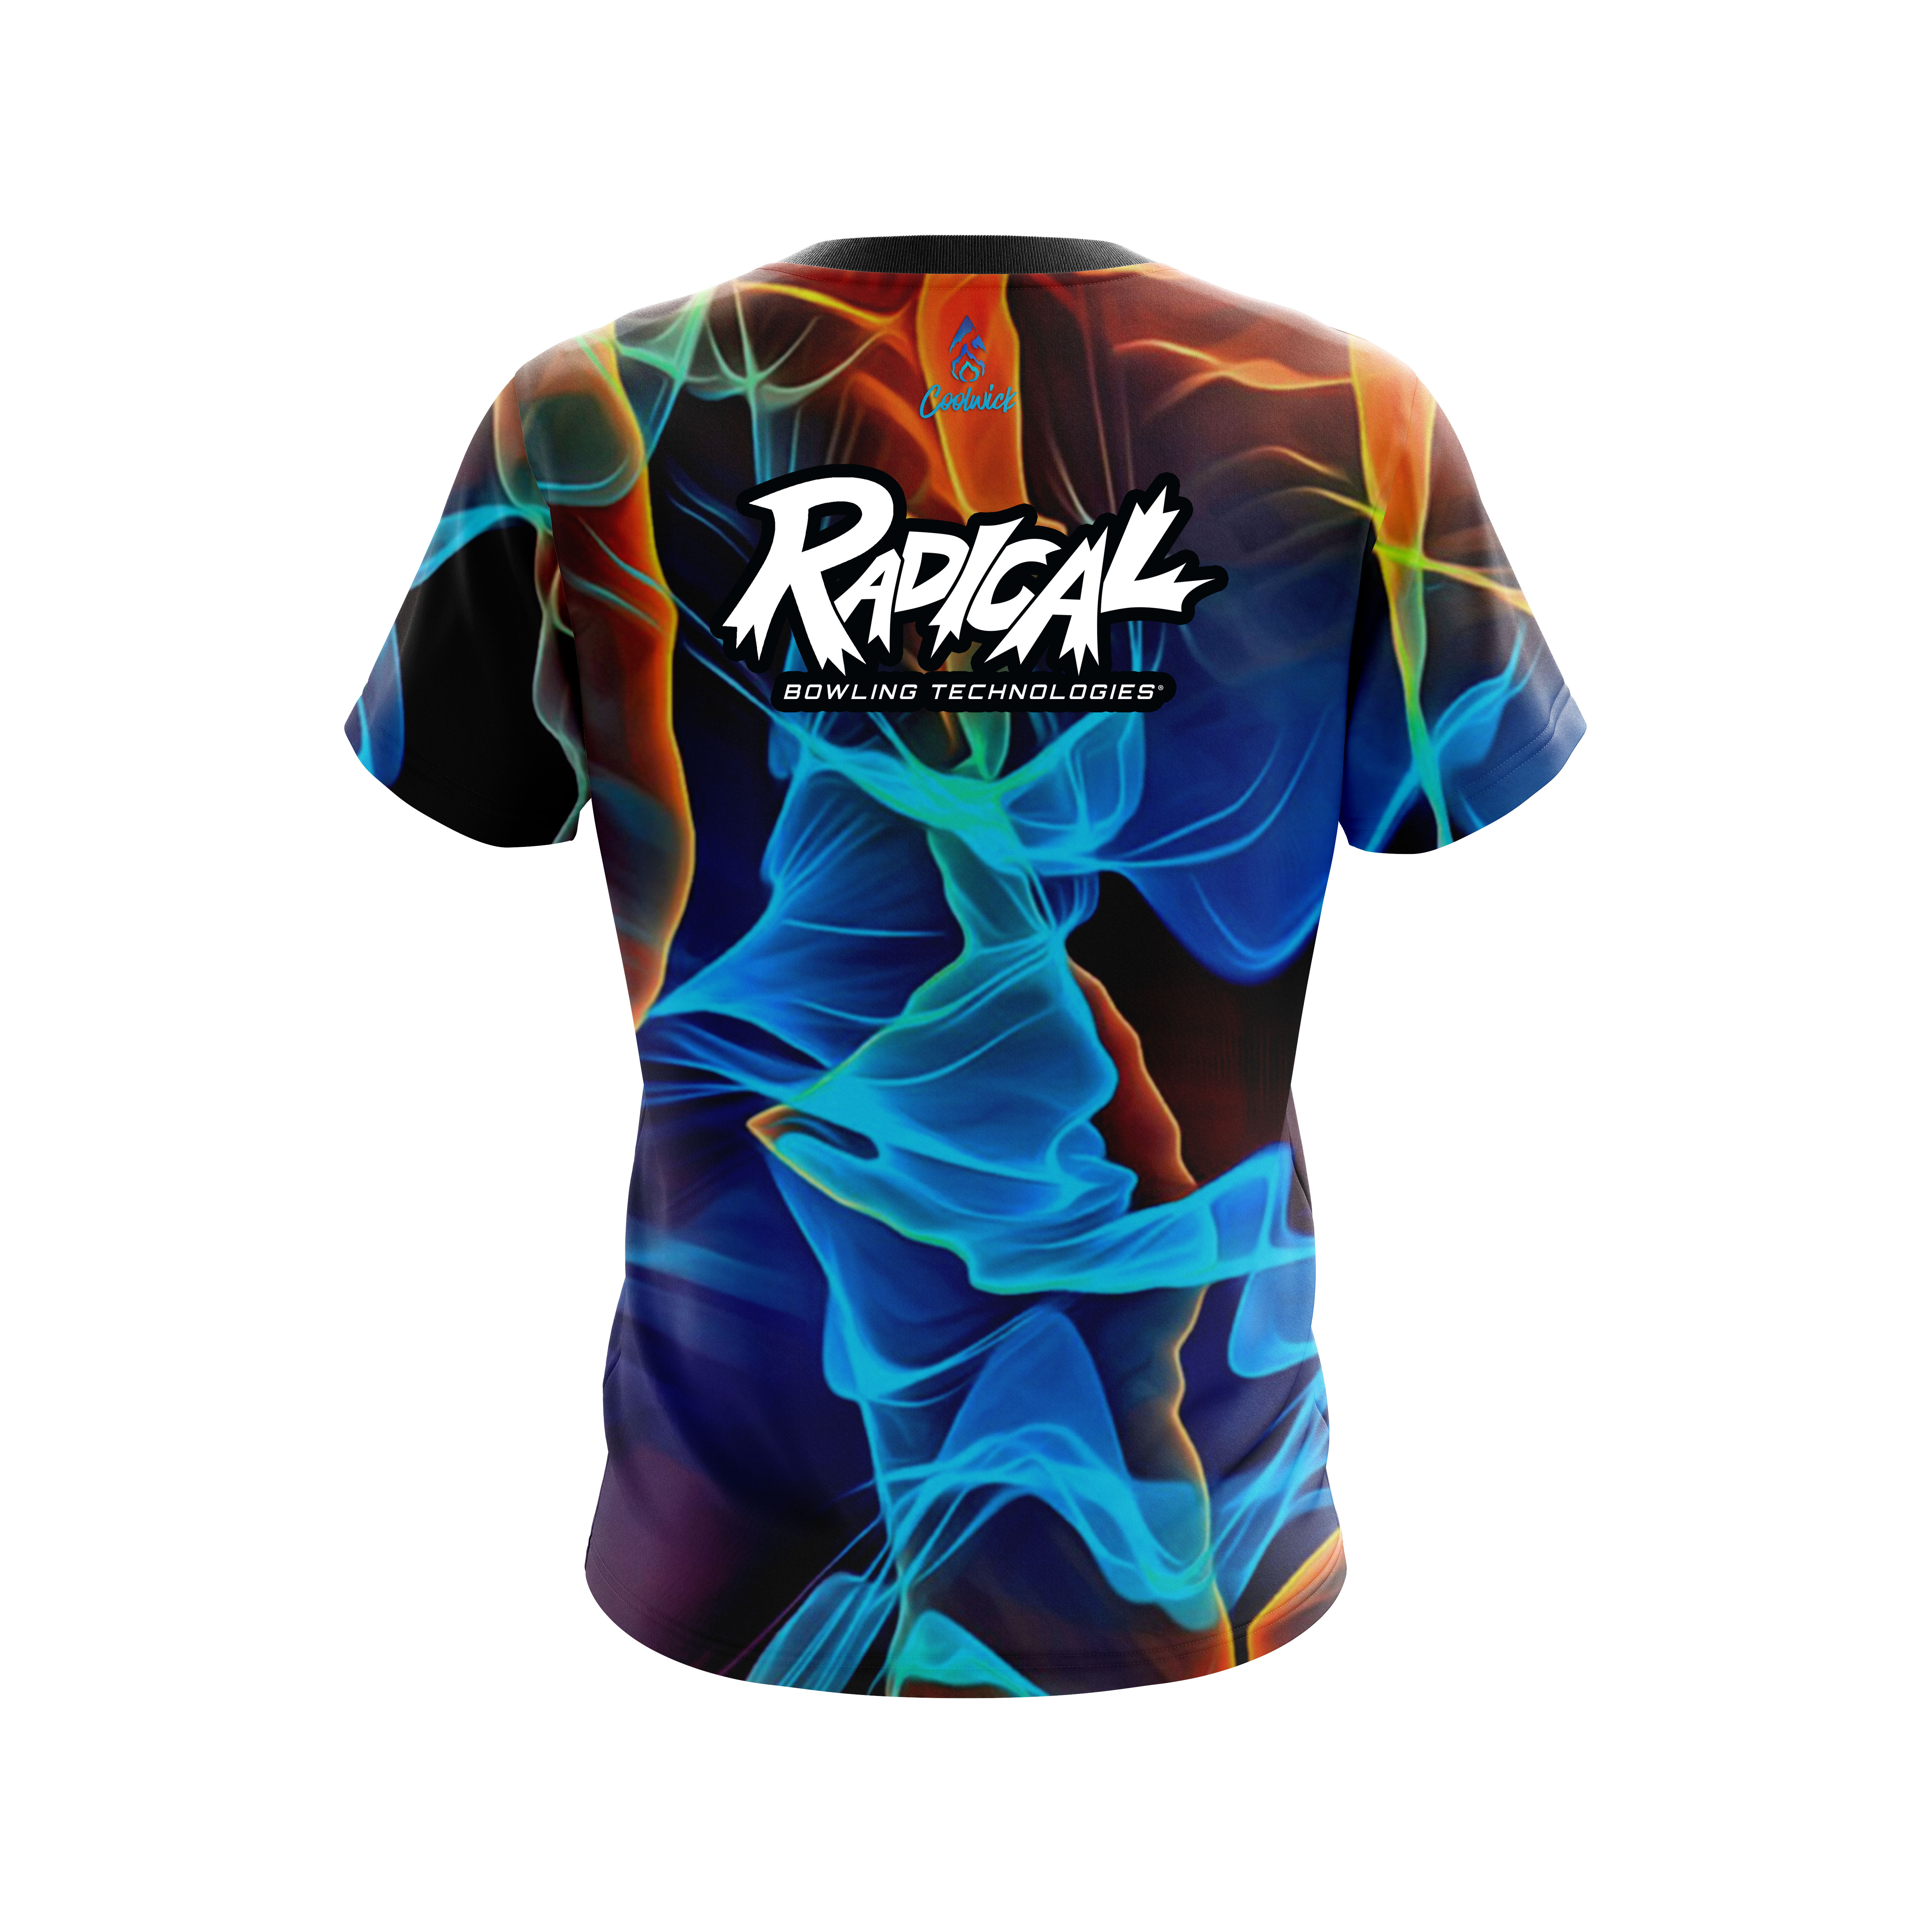 Radical Vortex Green CoolWick Bowling Jersey 